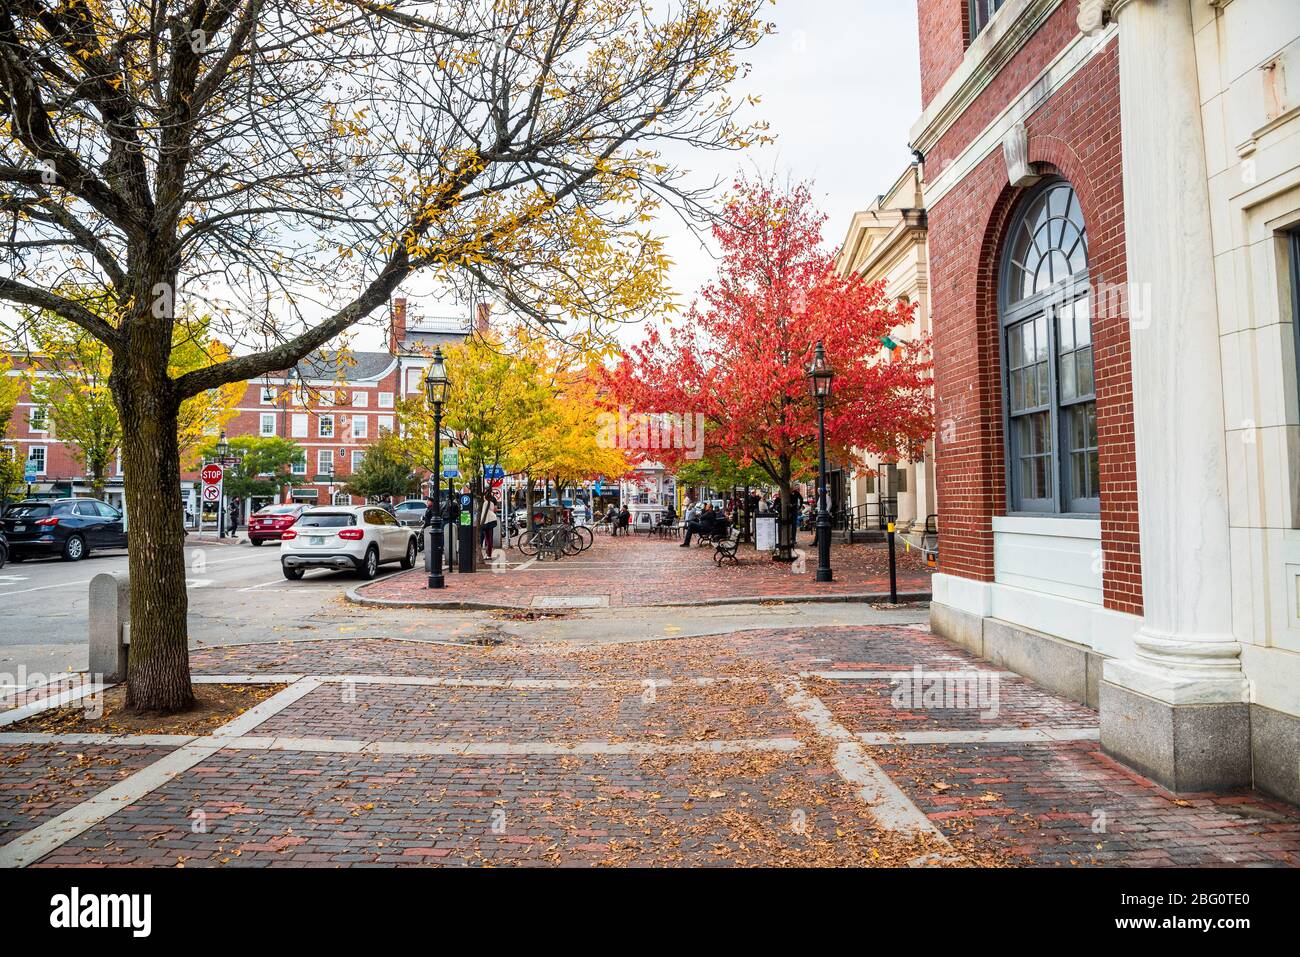 Cowd of people in a small brick square lined with colourful trees along Pleasant Street in downtown Portsmoutn, NH. Stock Photo